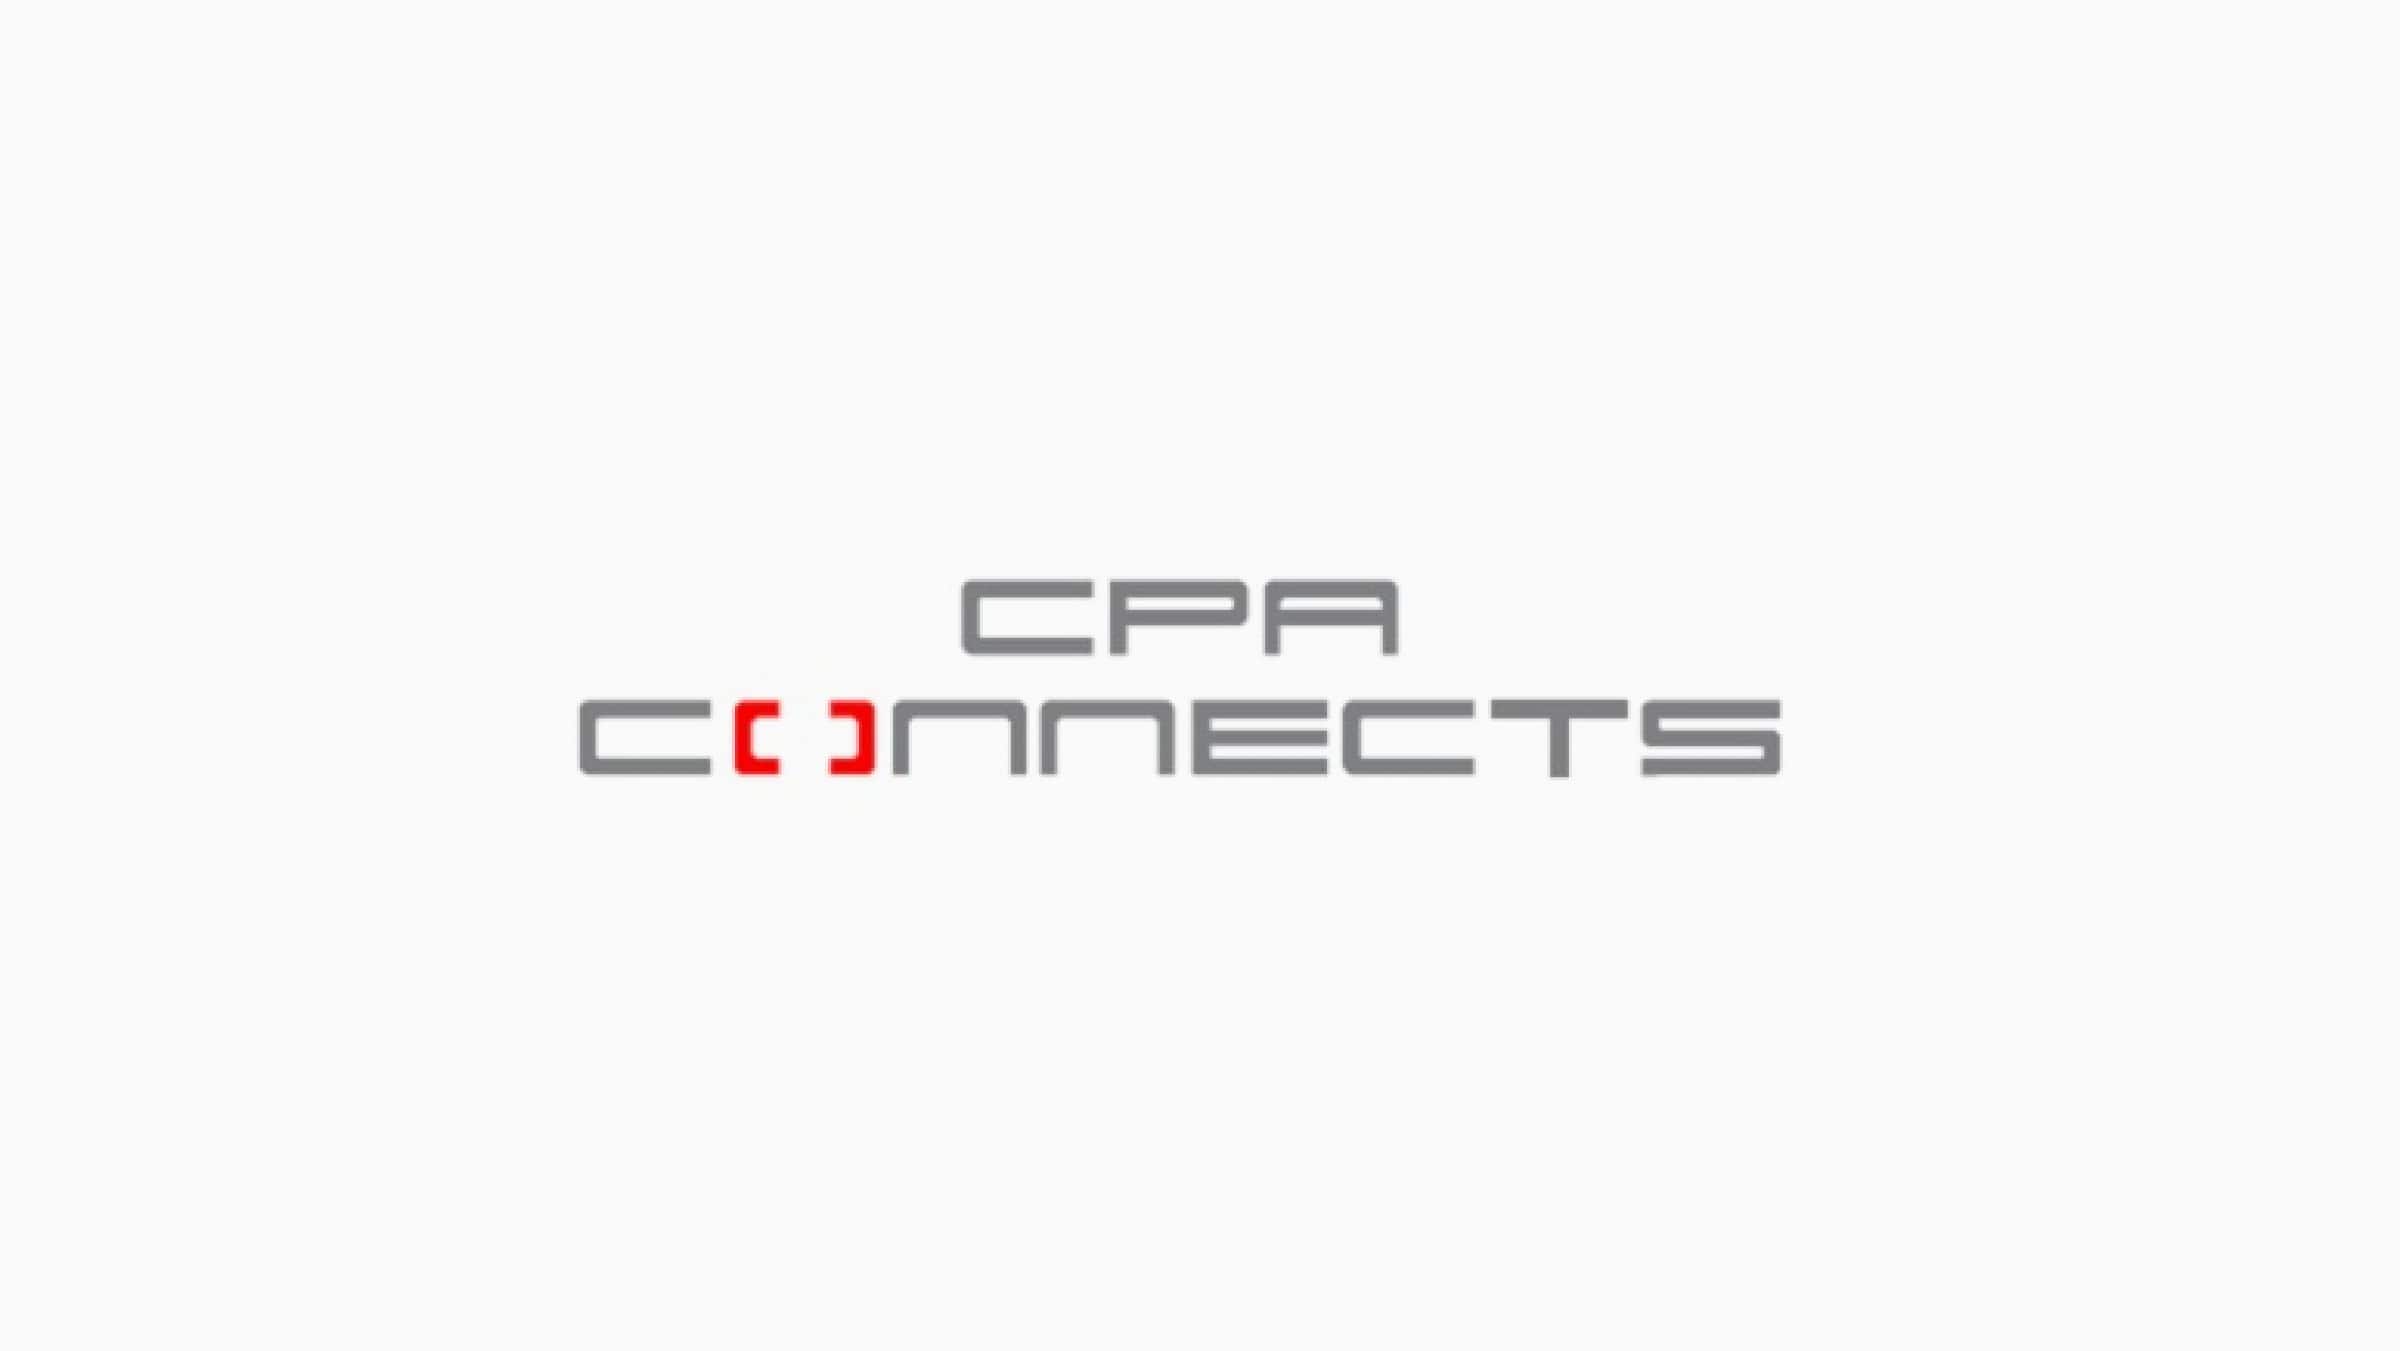 The CPA Connects logo